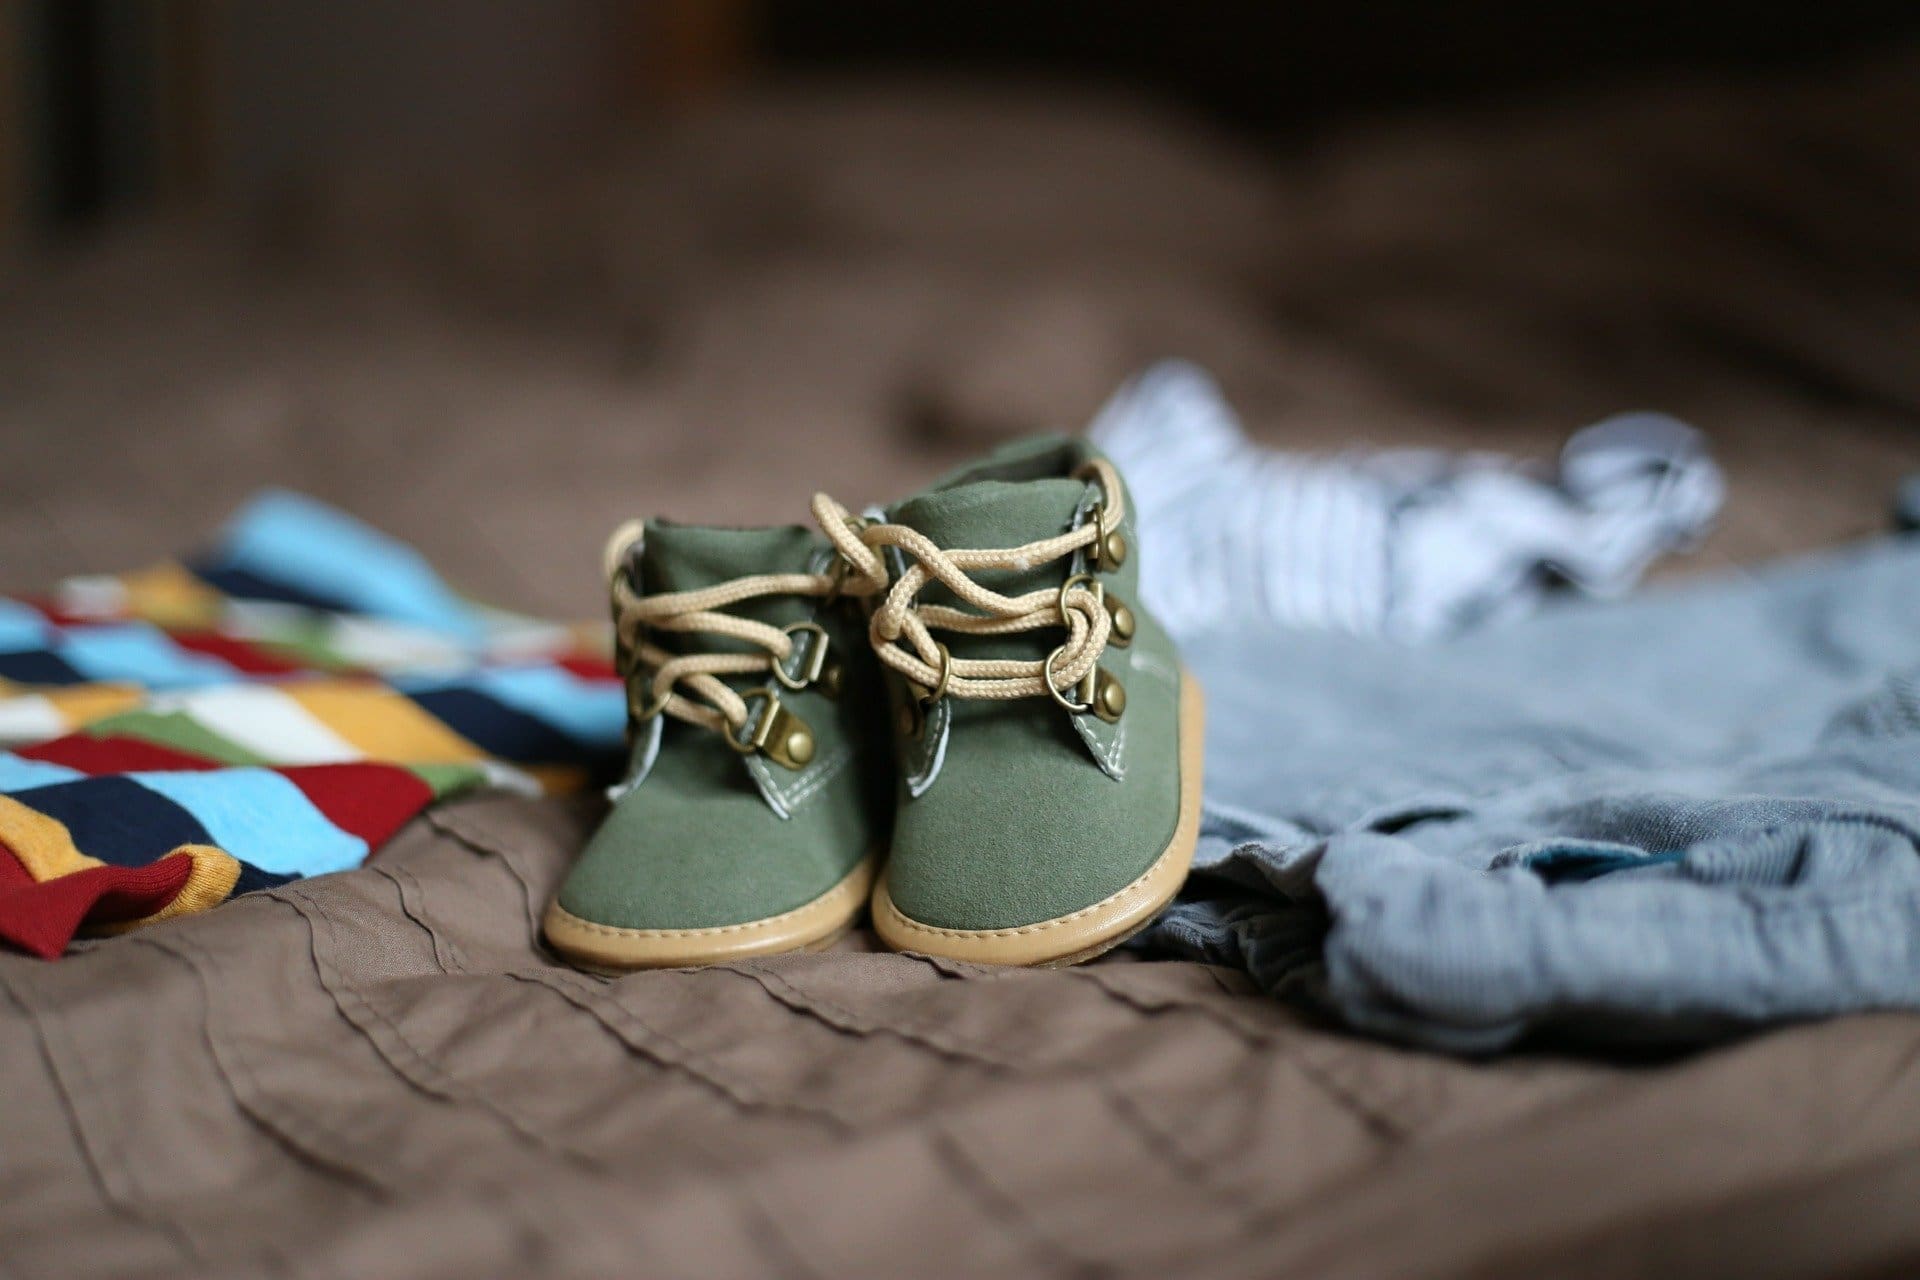 Photo of baby shoes by sebagee for Pixabay